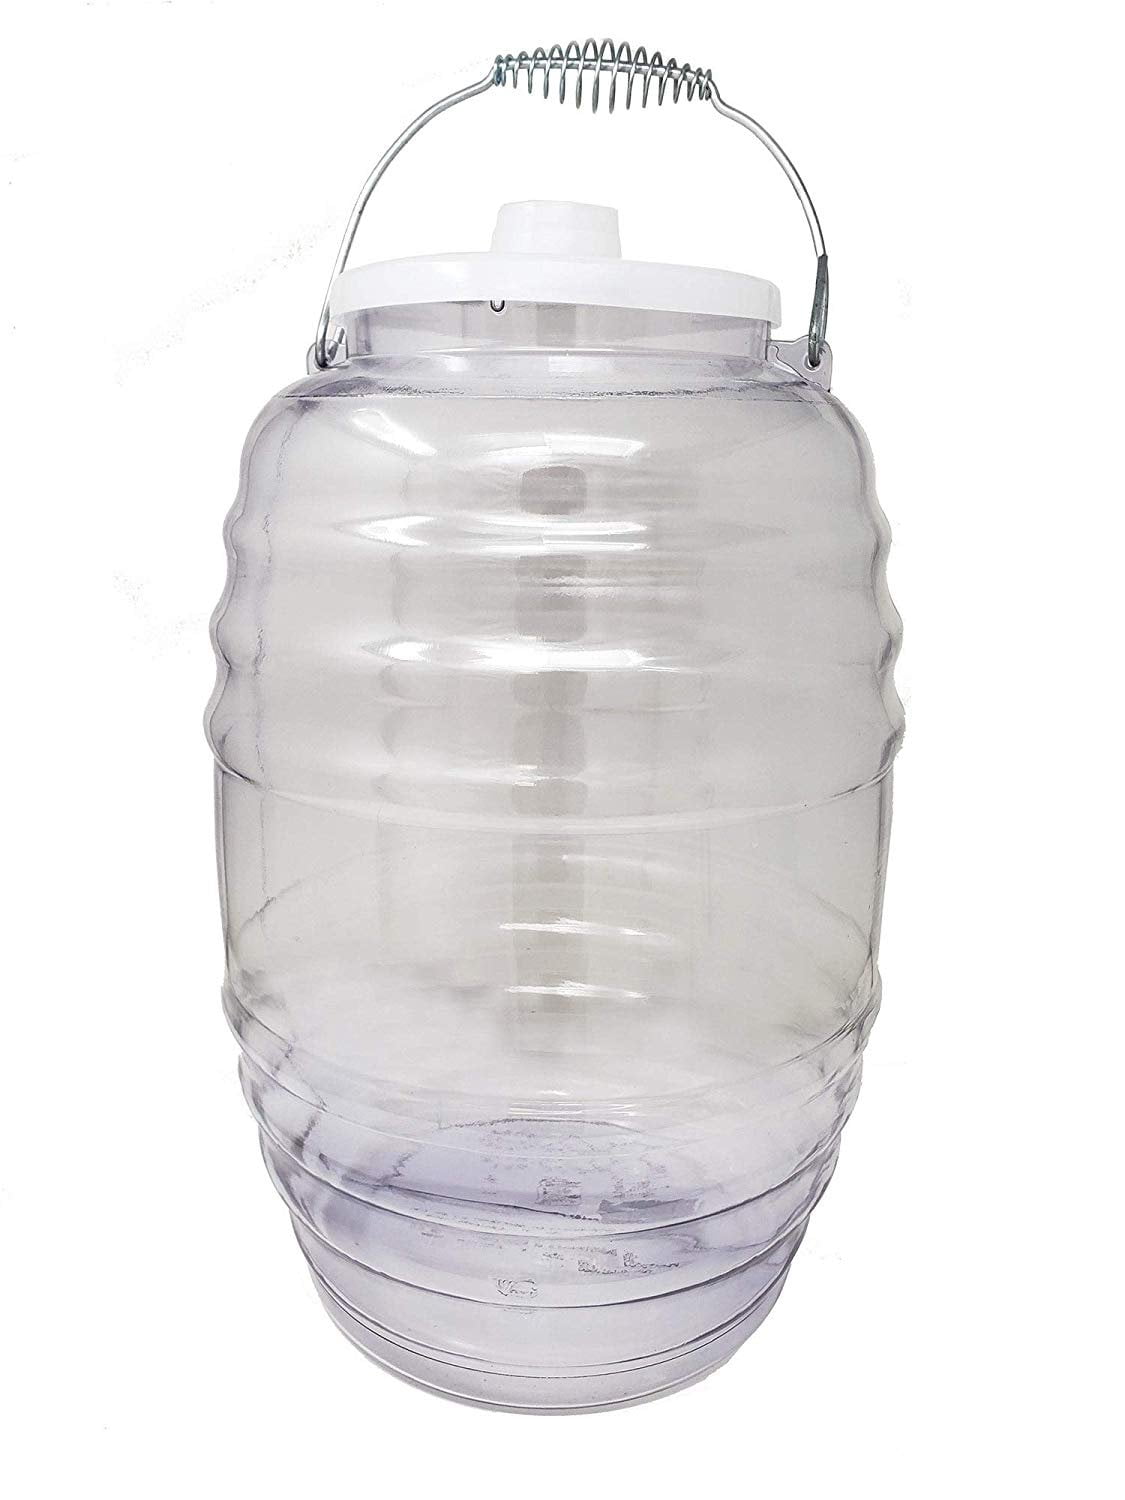 Heavy Duty Plastic Large Vitrolero Aguas Frescas Plastic Water Container  Pitcher Dispenser Jug with Lid, 5 gal,20 L - Clear, 17 x 11- BPA Free 